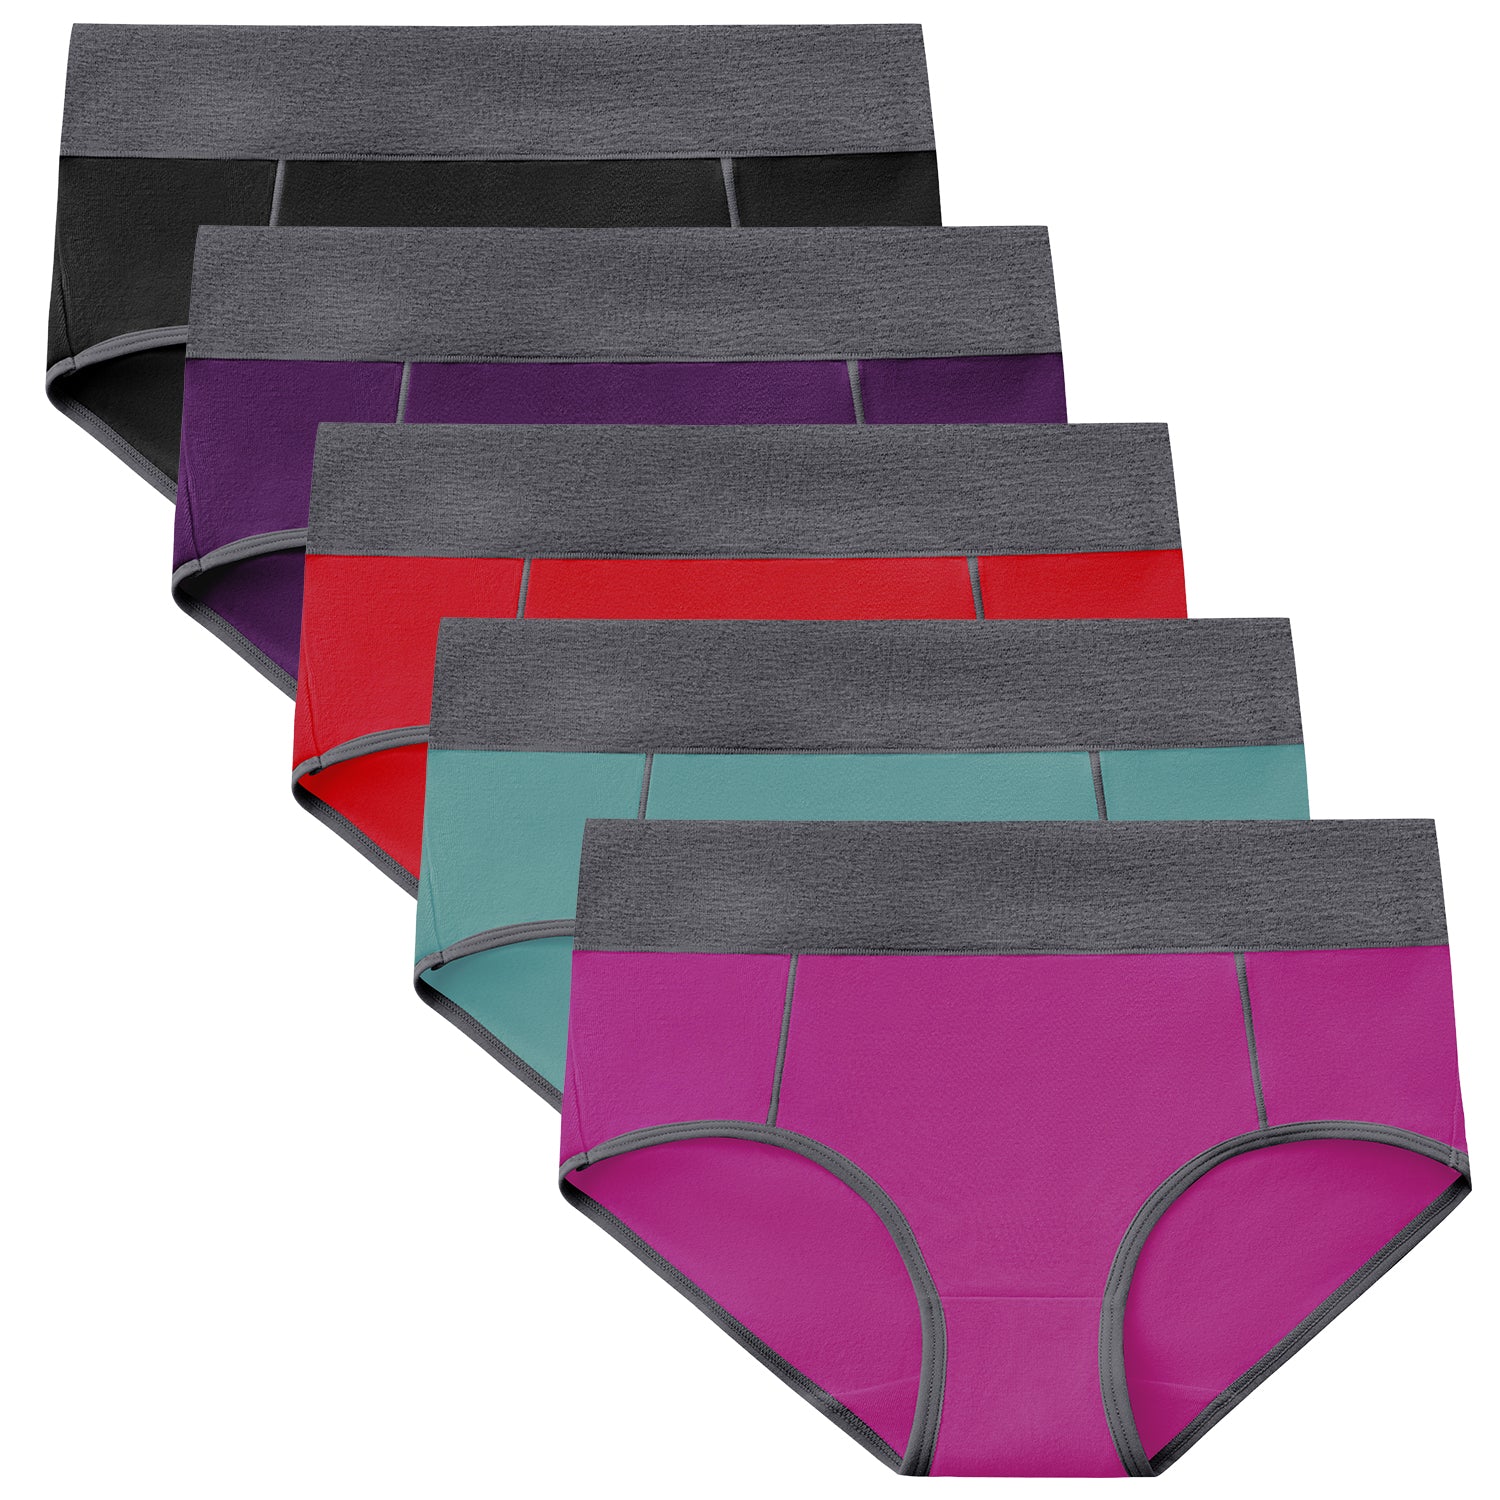 Buy KETKAR Women's Underwear Plain+Printed Nickers Hosiery Cotton Panties  Combo_Multicolour(Pack of 10,Small) at